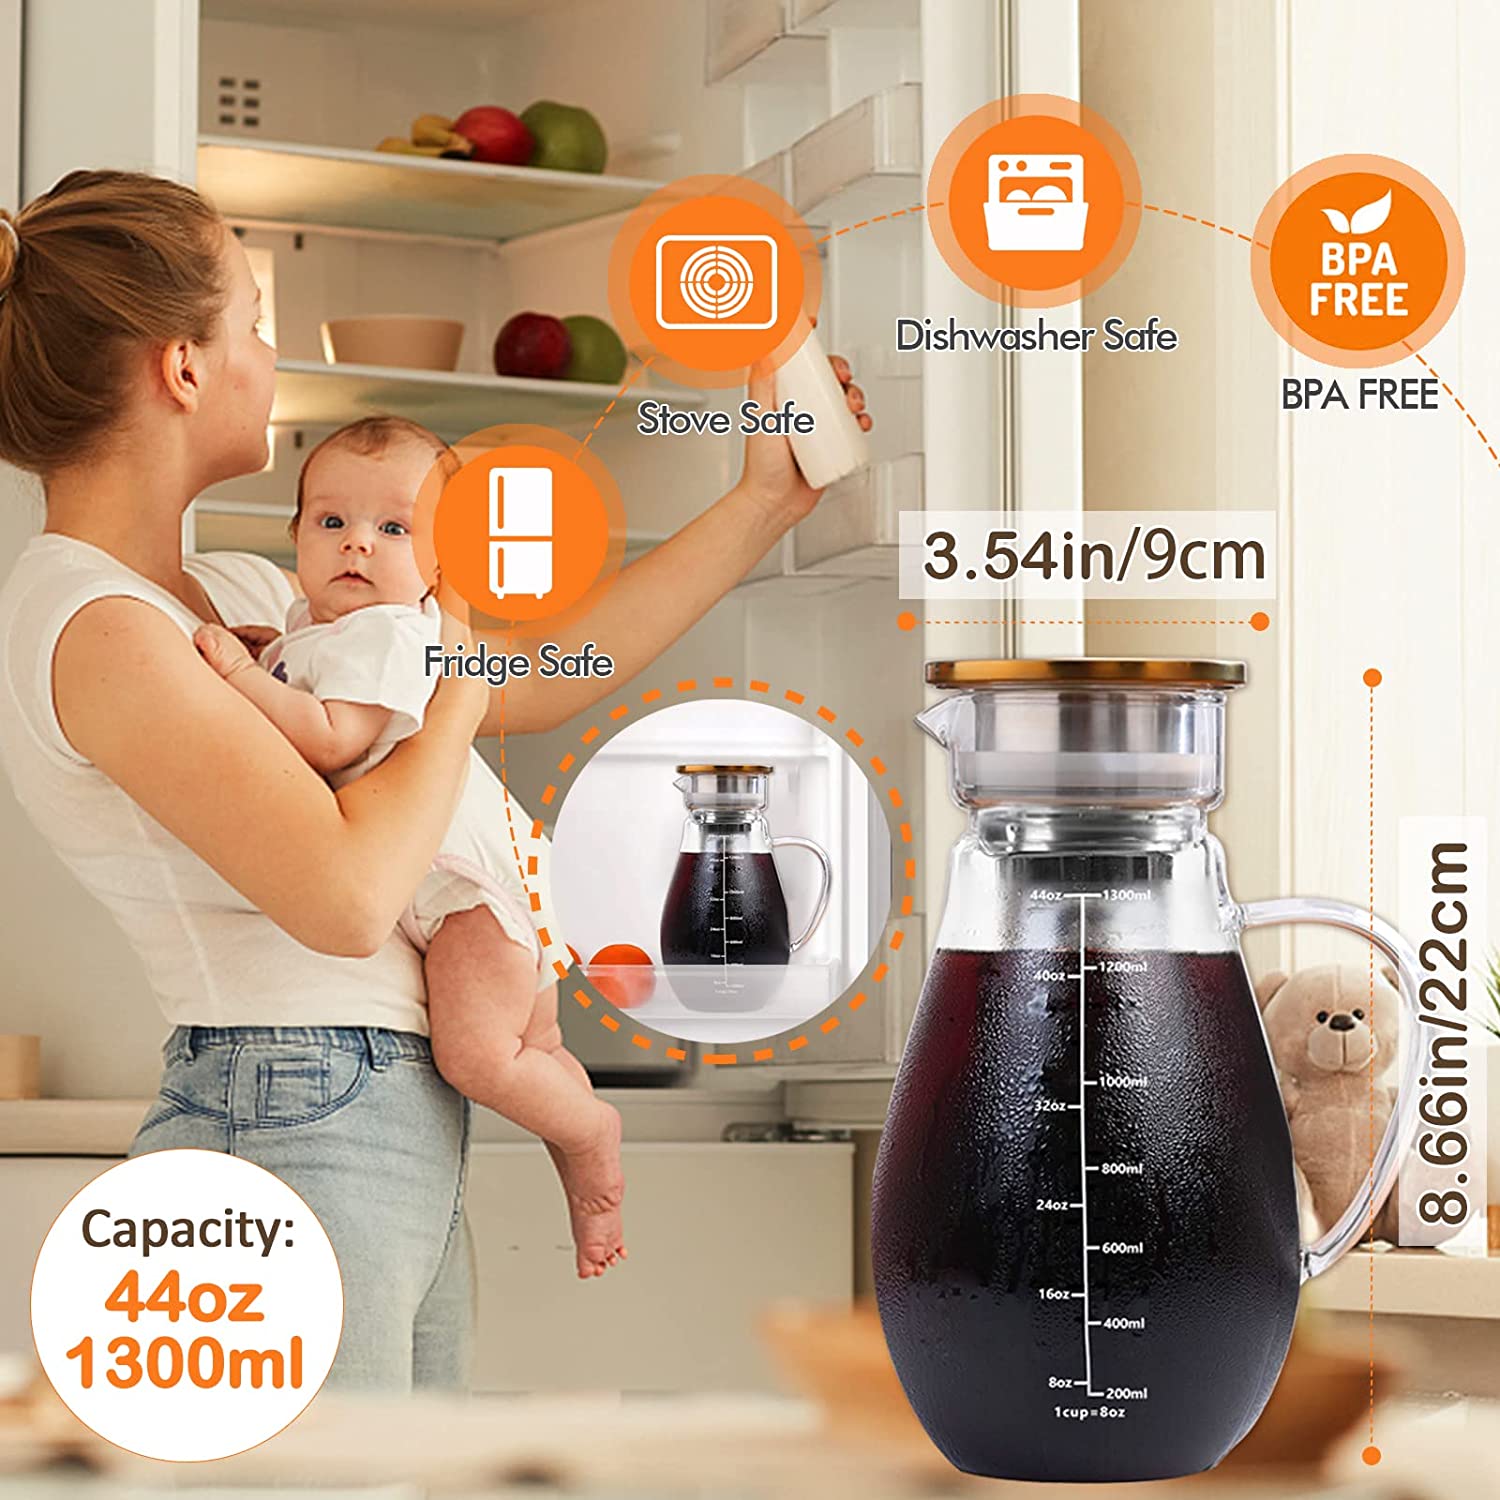 Flash Cold Brew Coffee Maker Grey. The Seasoned Home